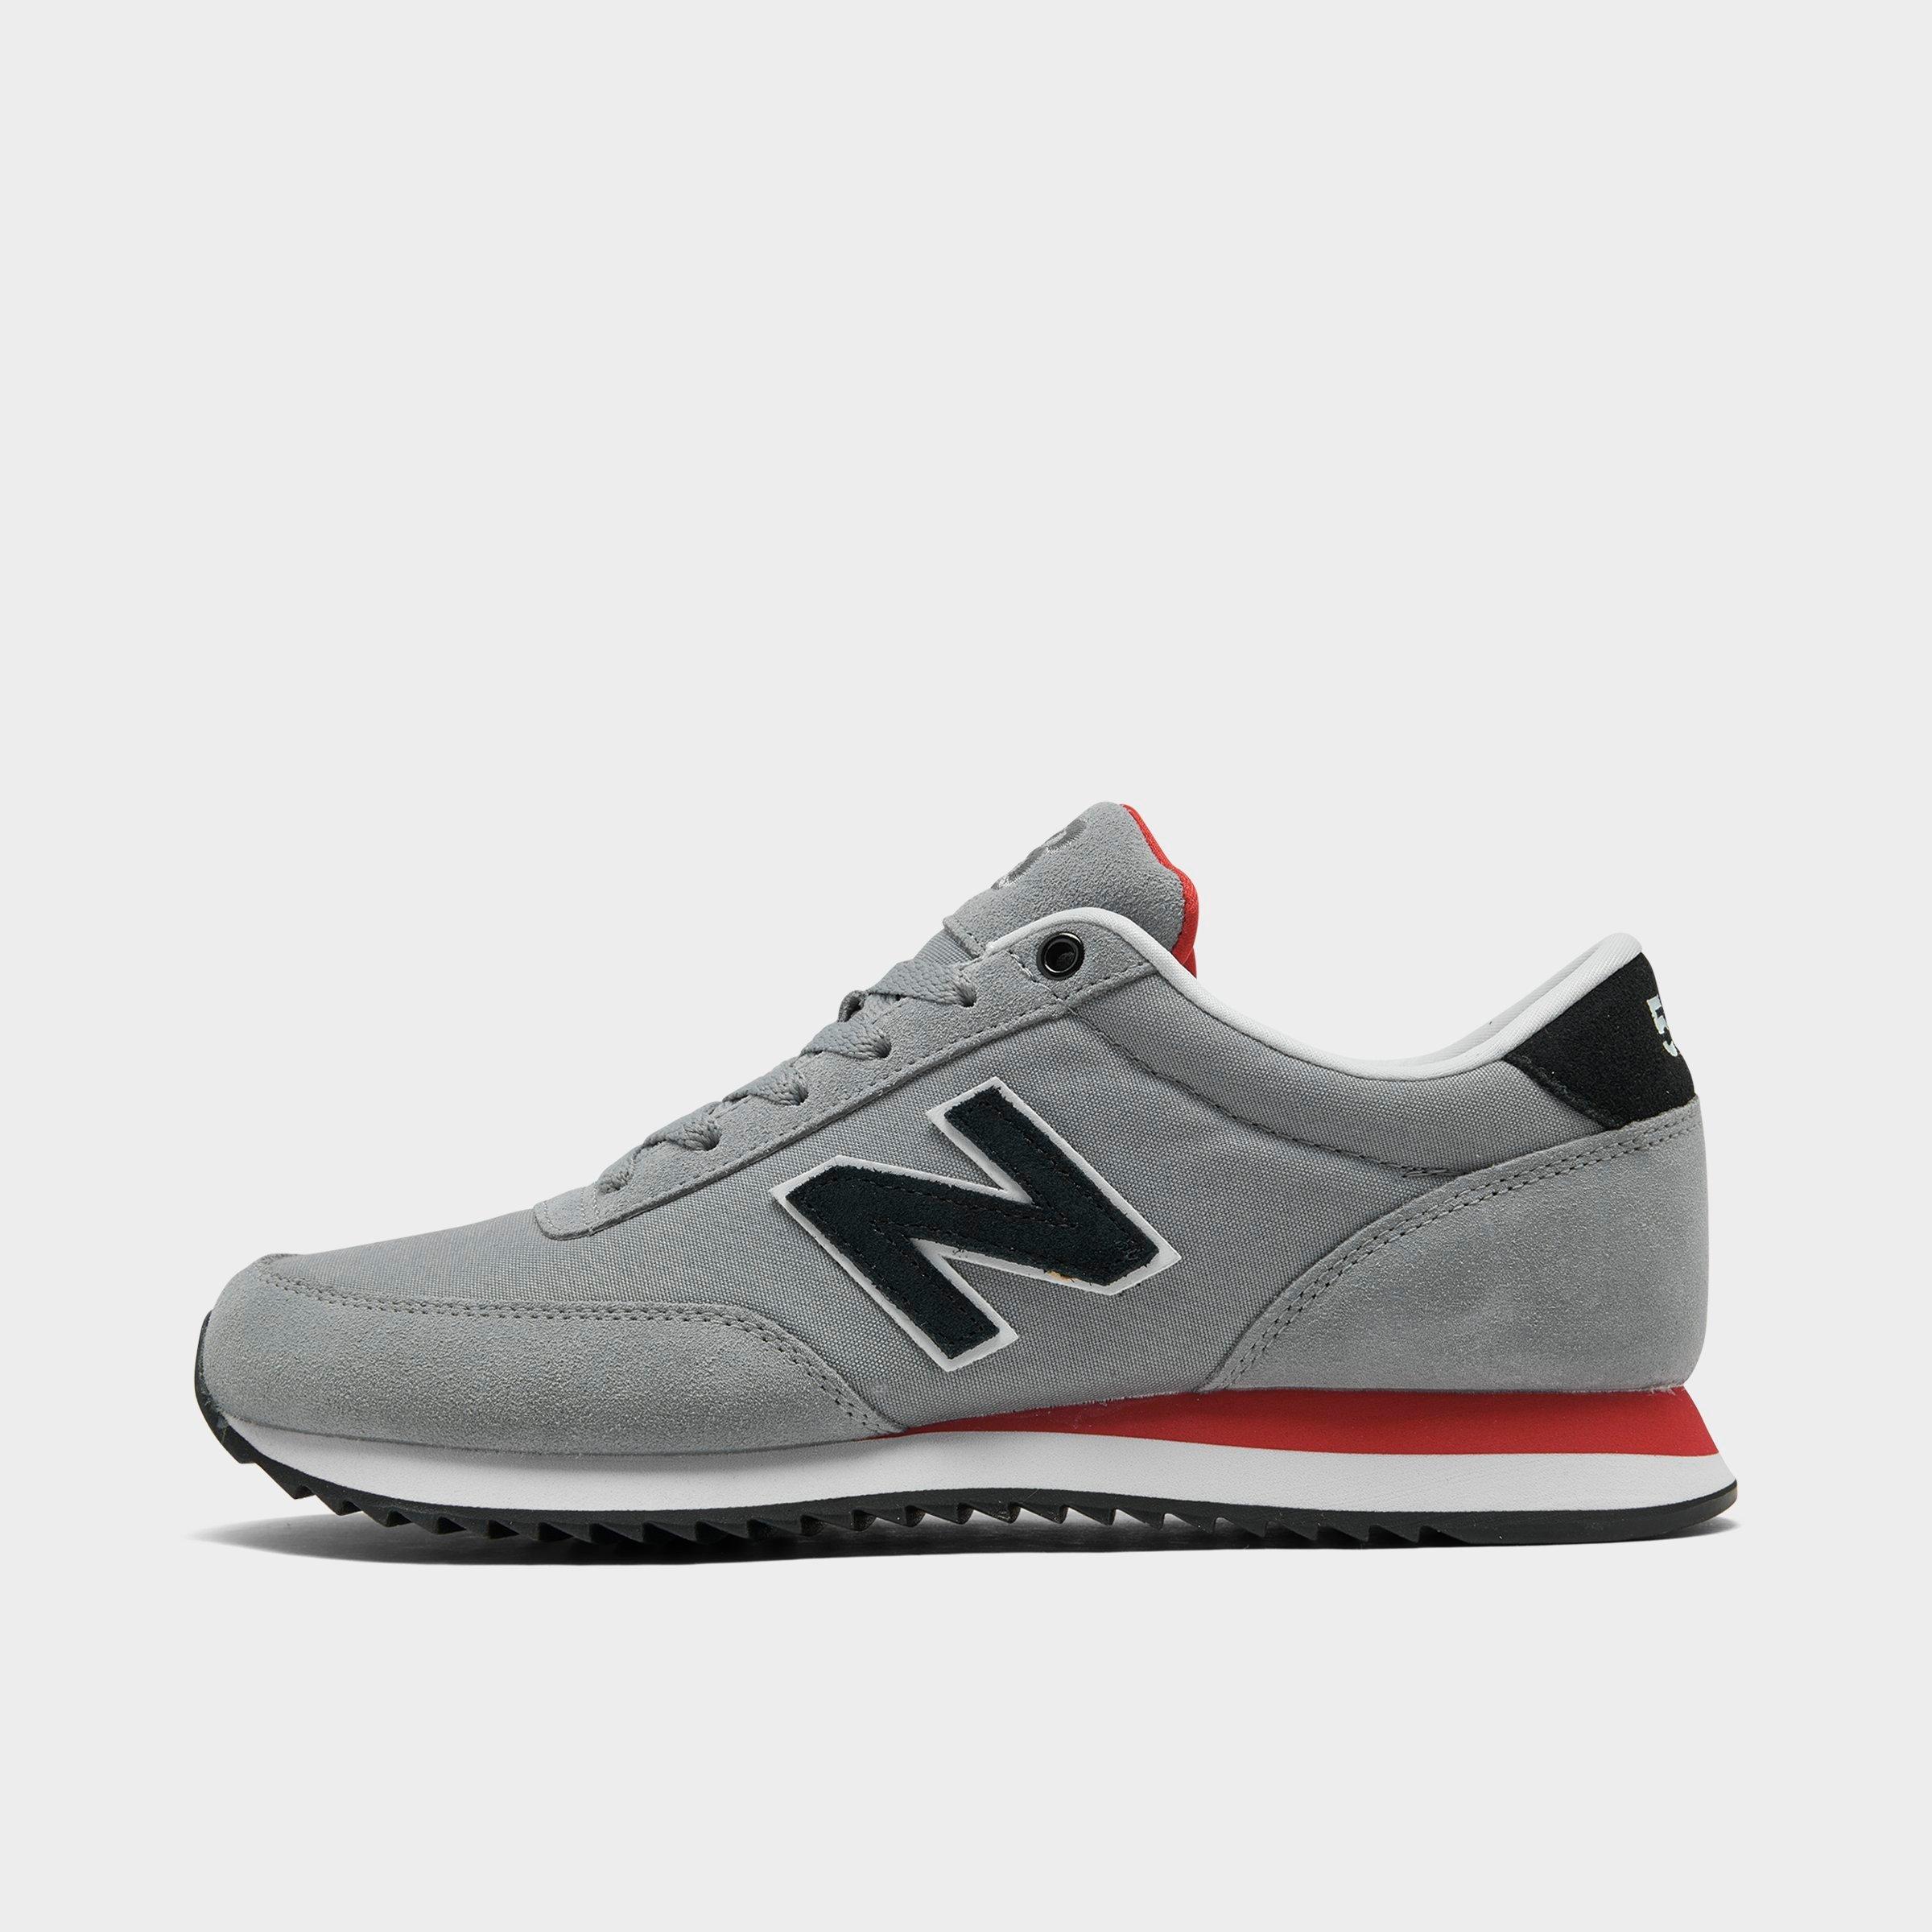 new balance mens 574 casual sneakers from finish line